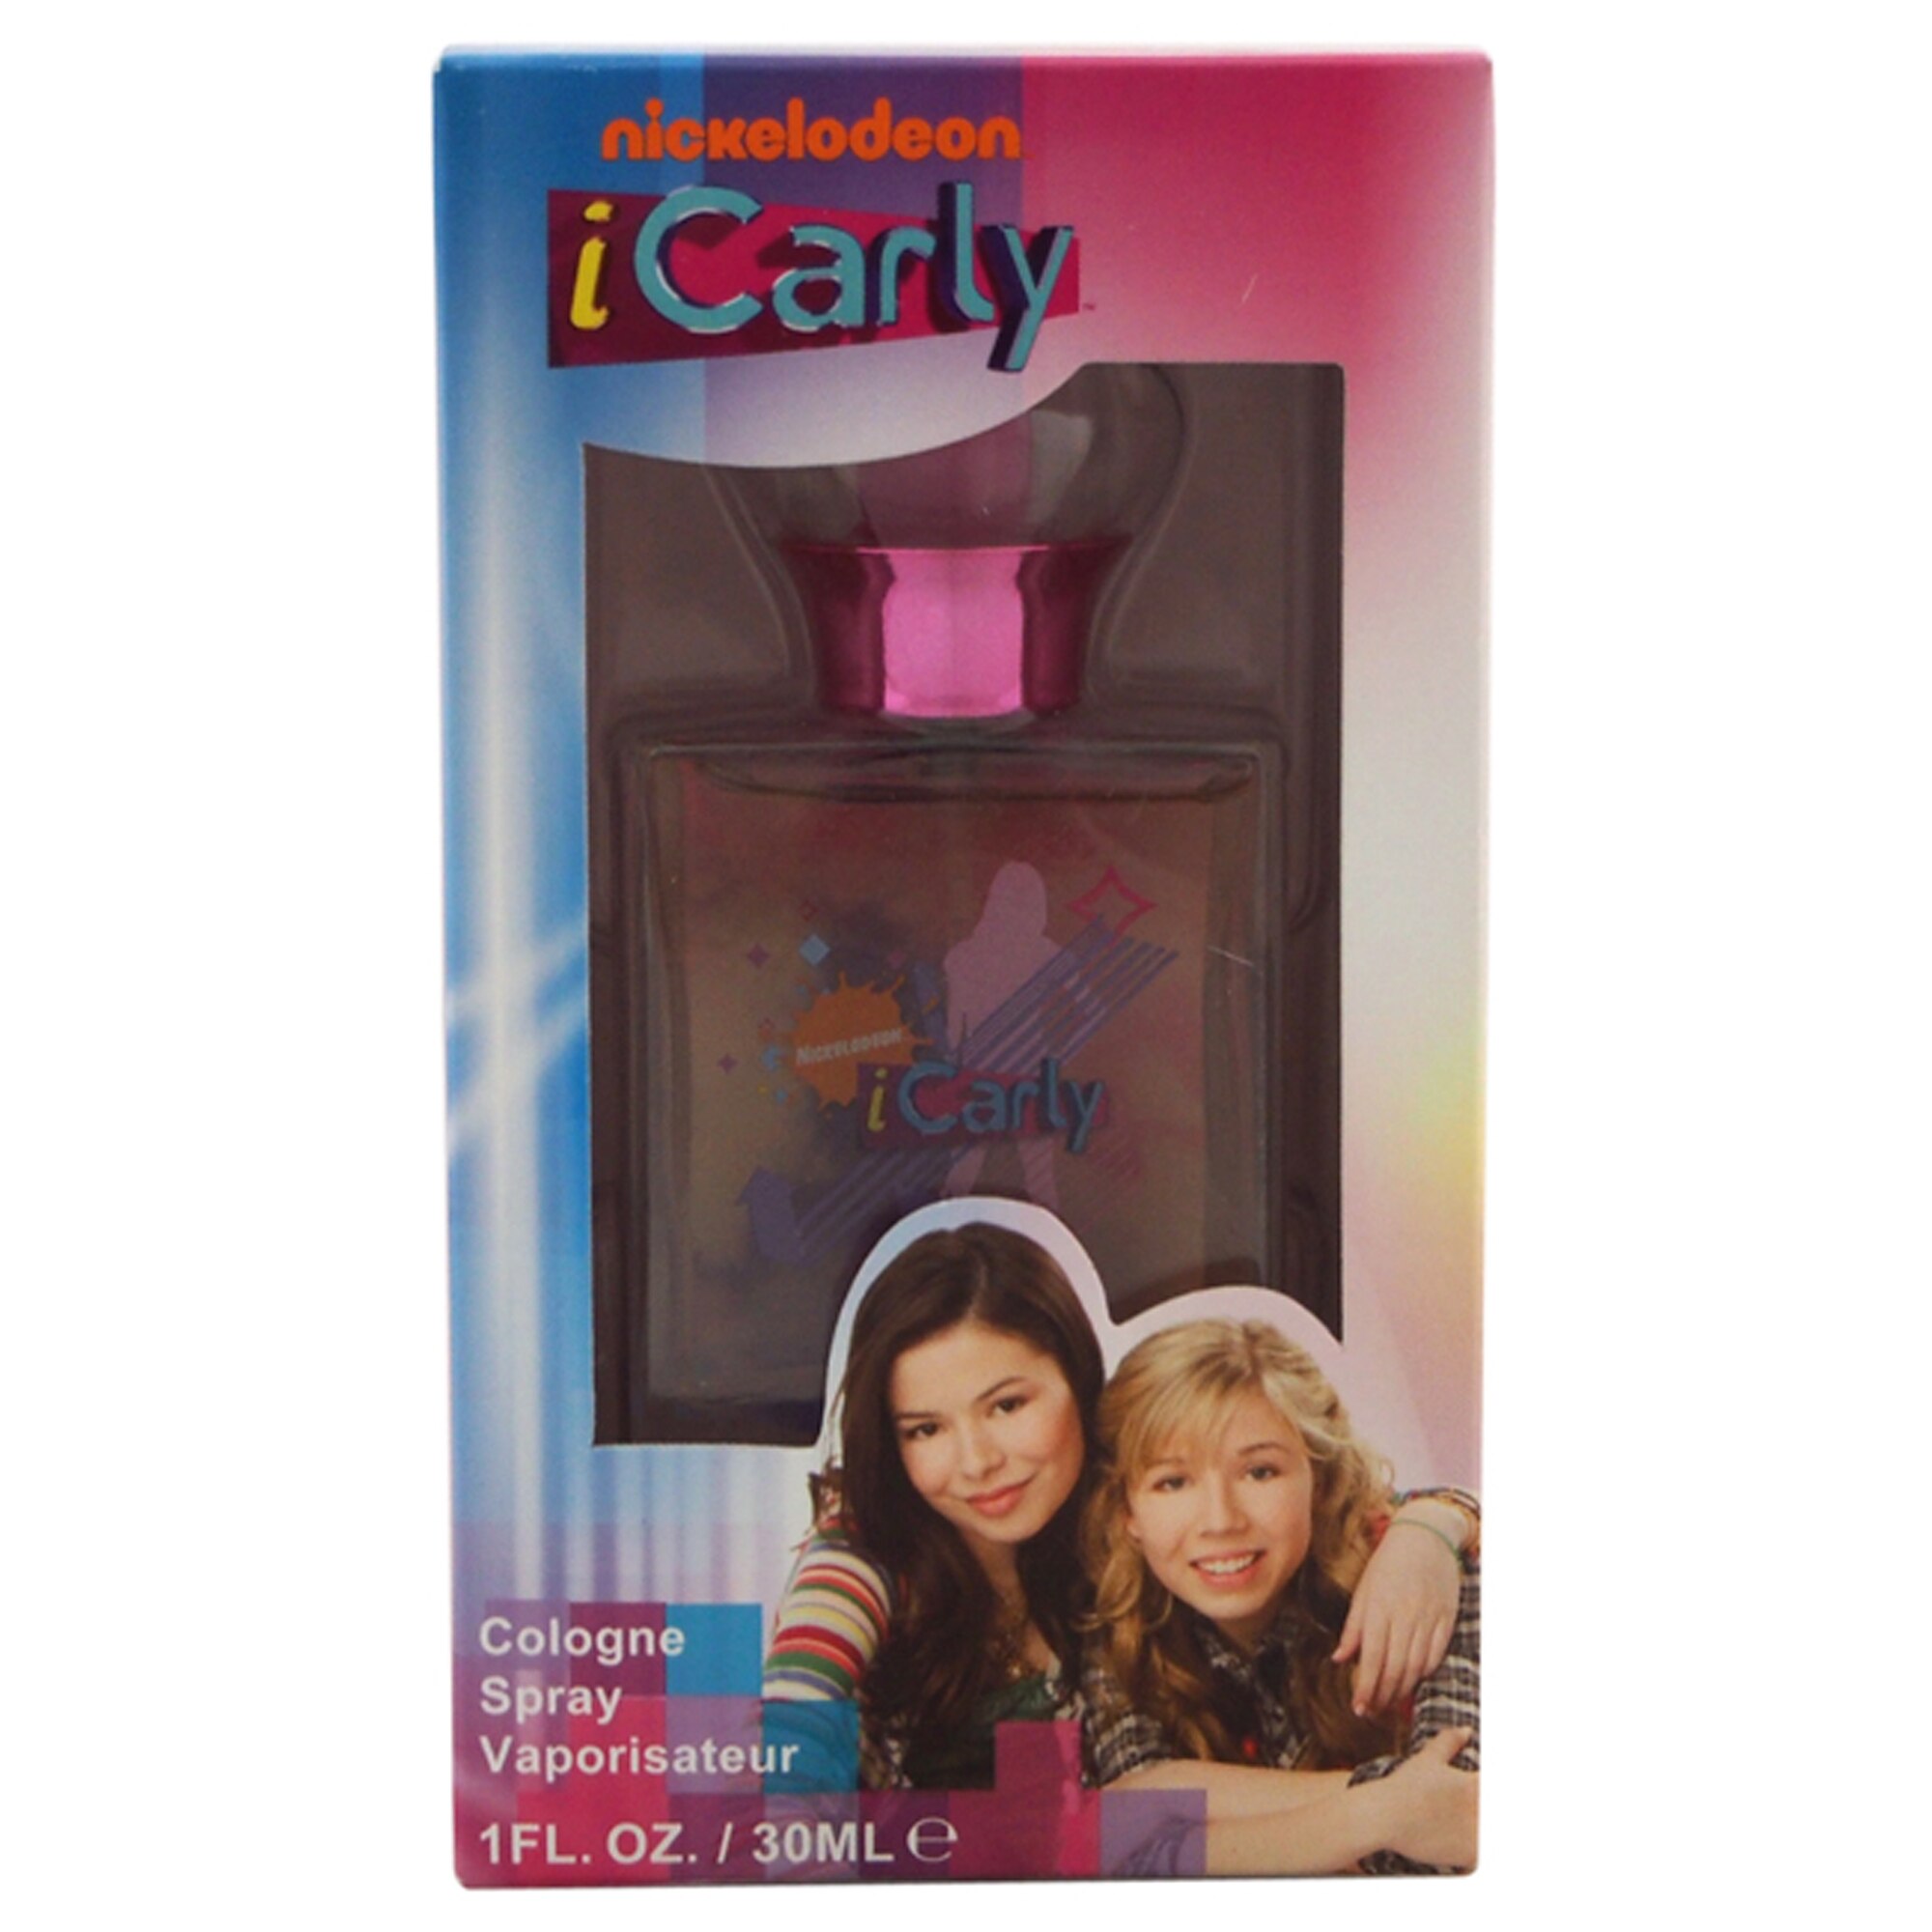 Icarly by Nickelodeon for Women - 1 oz Cologne Spray